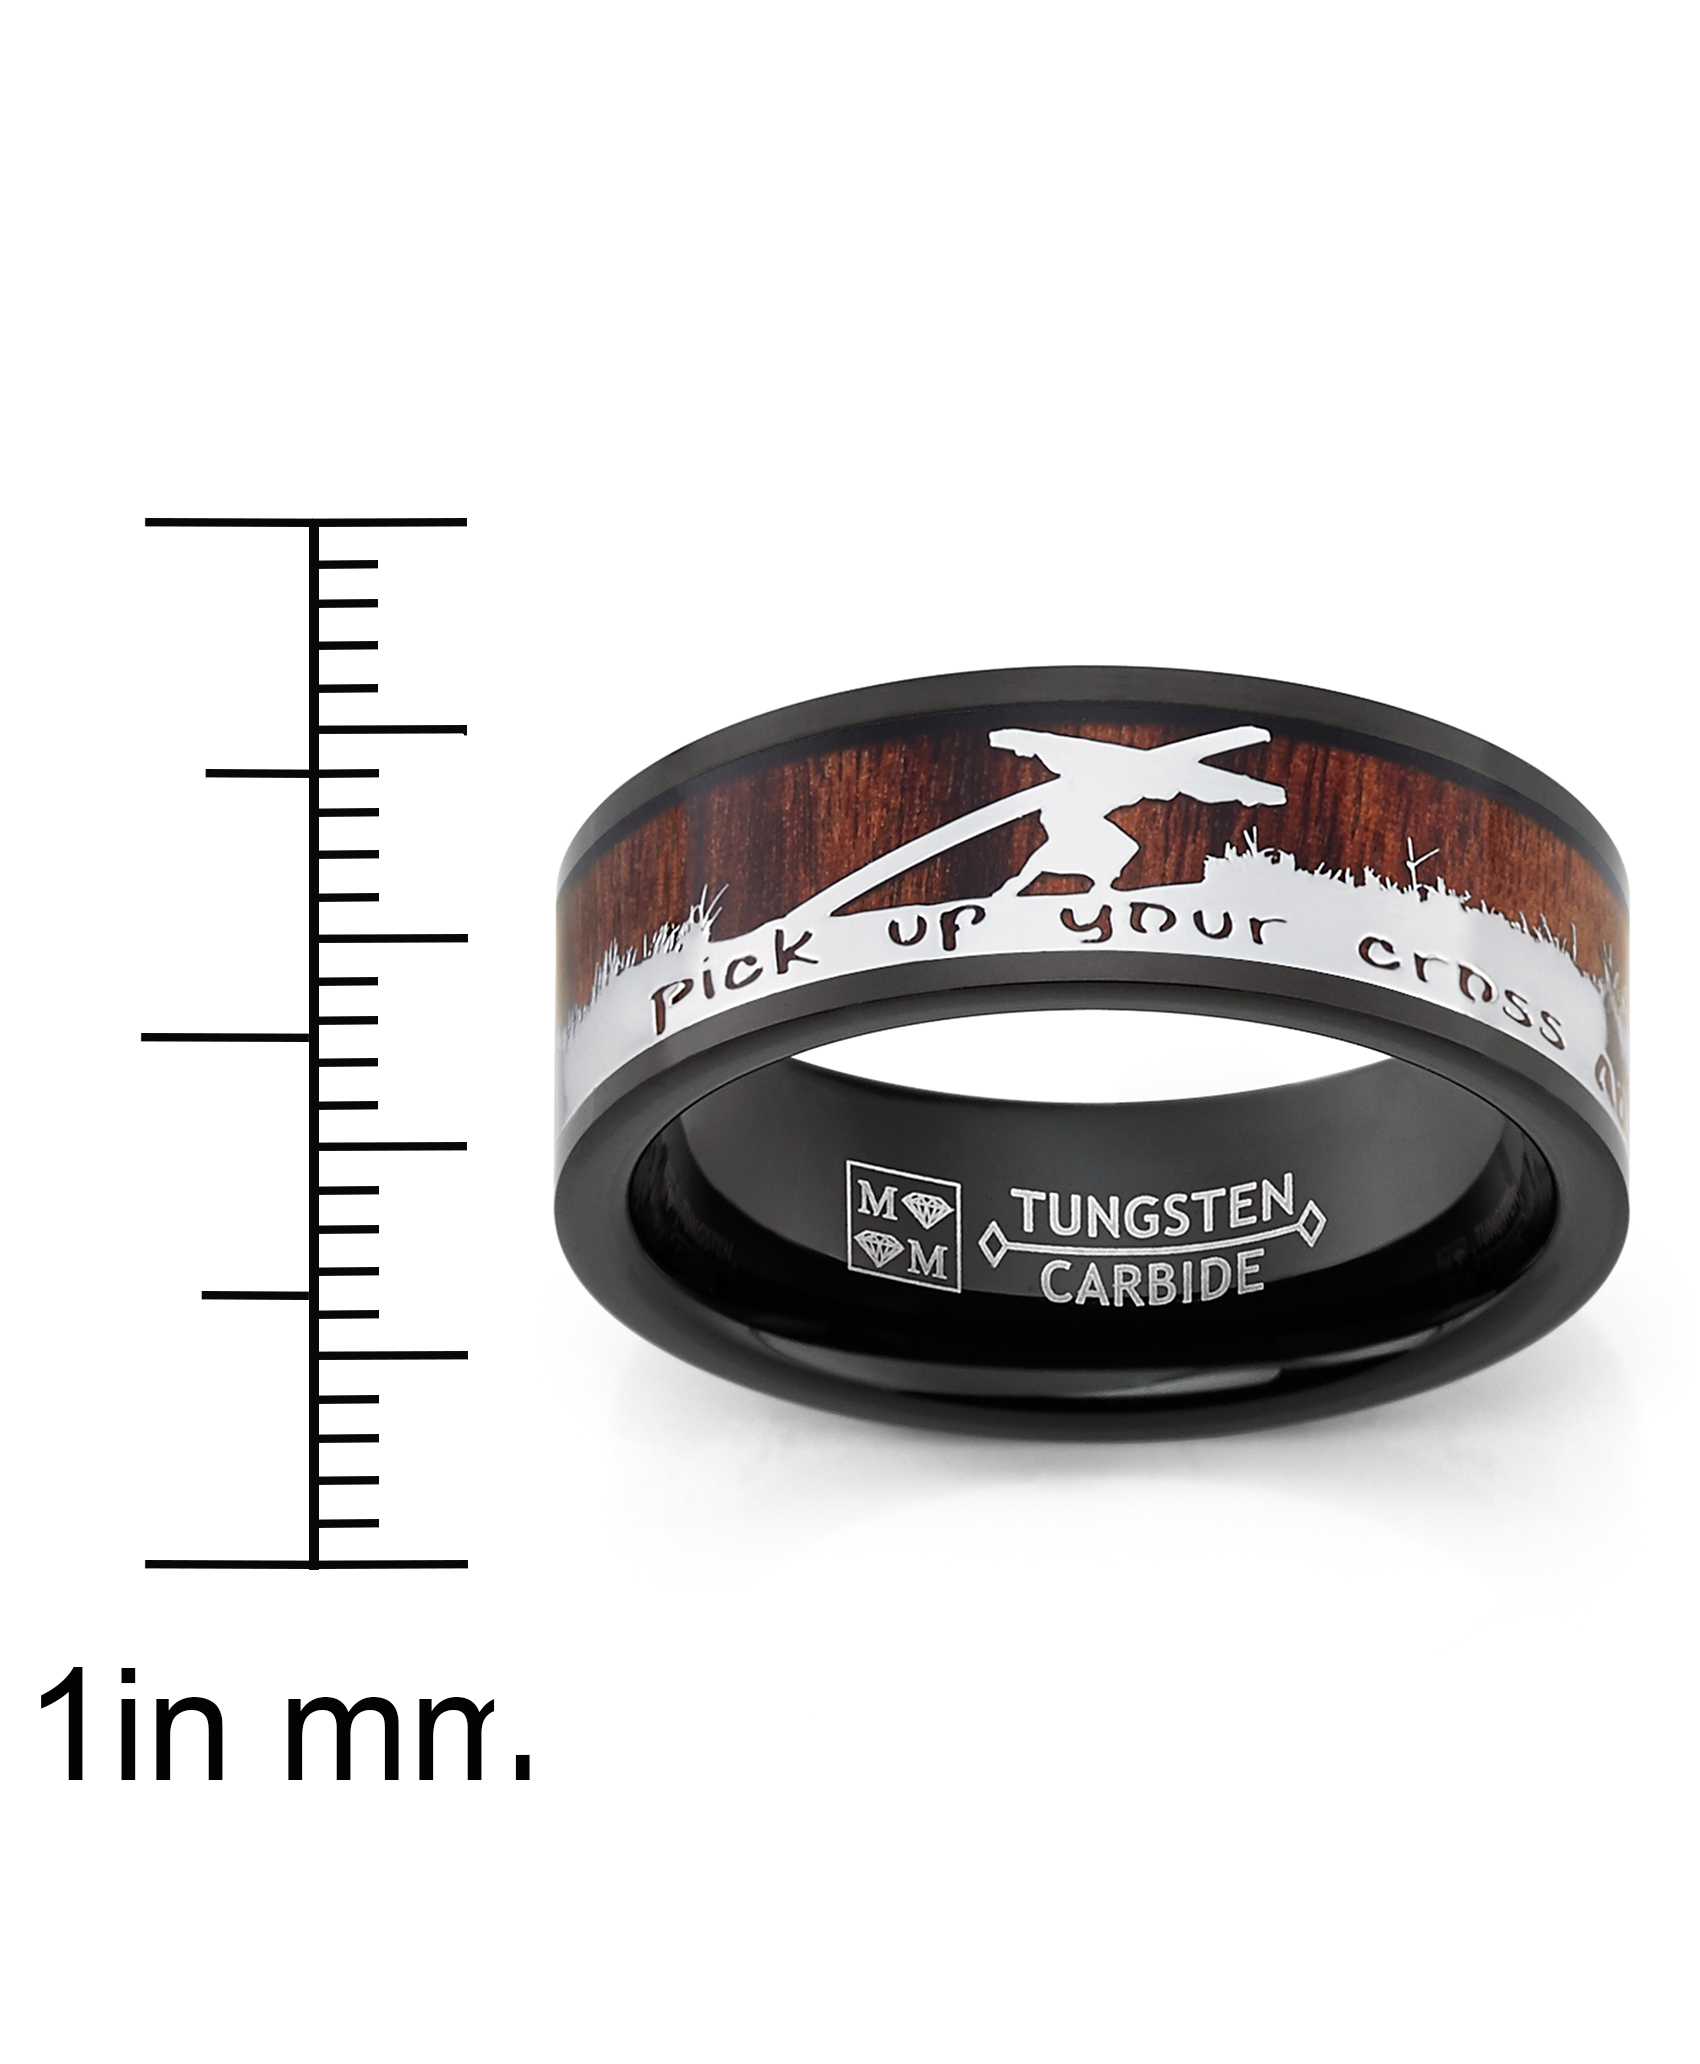 Metal Masters Co. Men's Christian Tungsten Ring Jesus Carrying Cross Bible Verse Wood Inlay 8MM